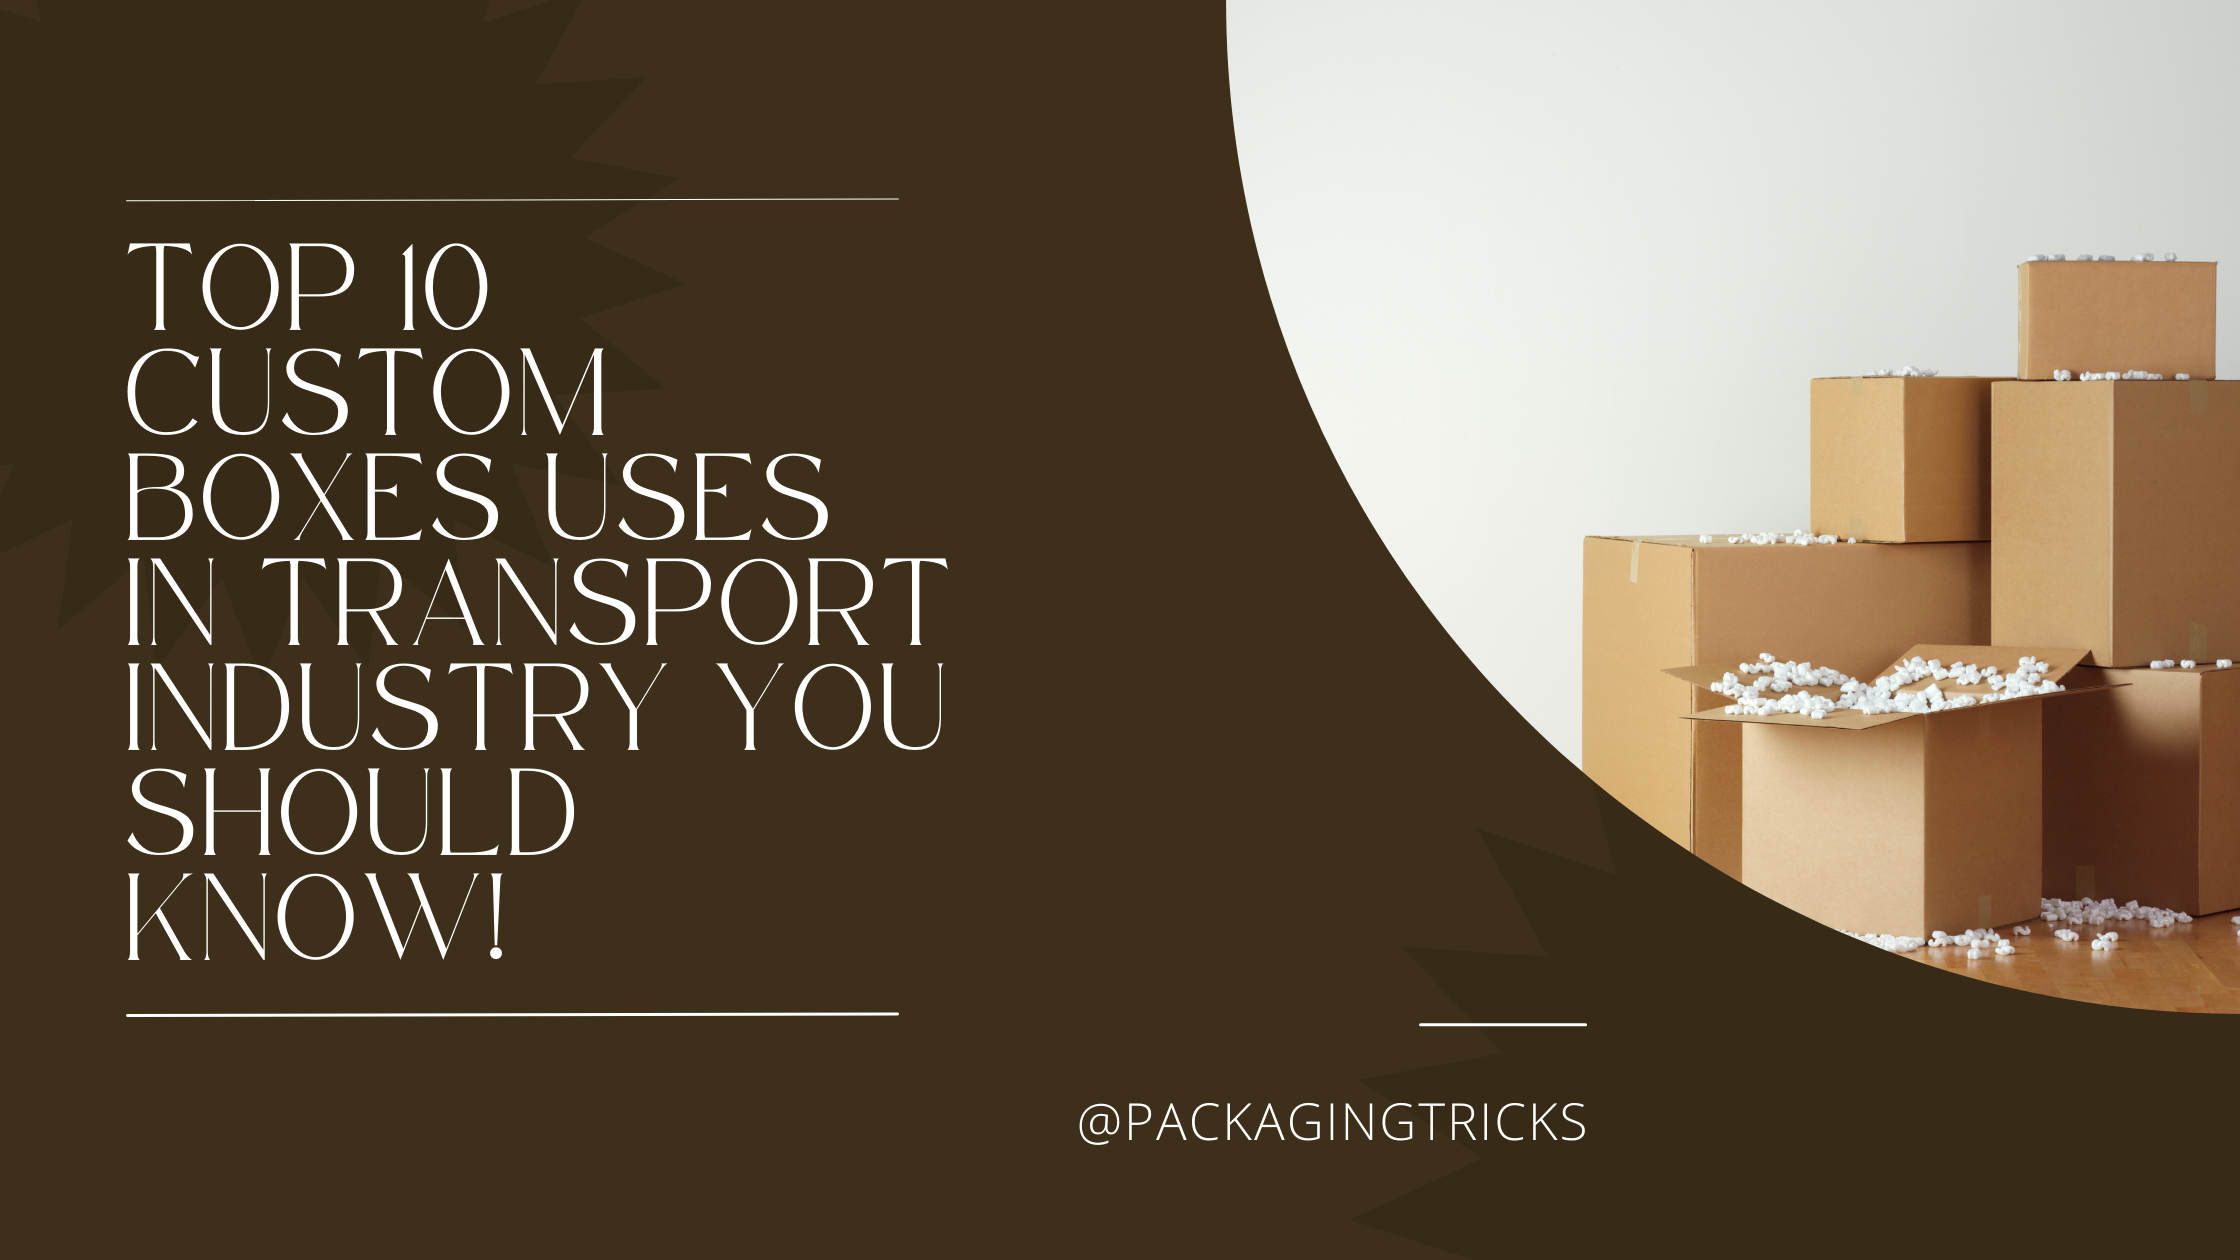 Top 10 Custom Boxes uses in transport Industry you should know